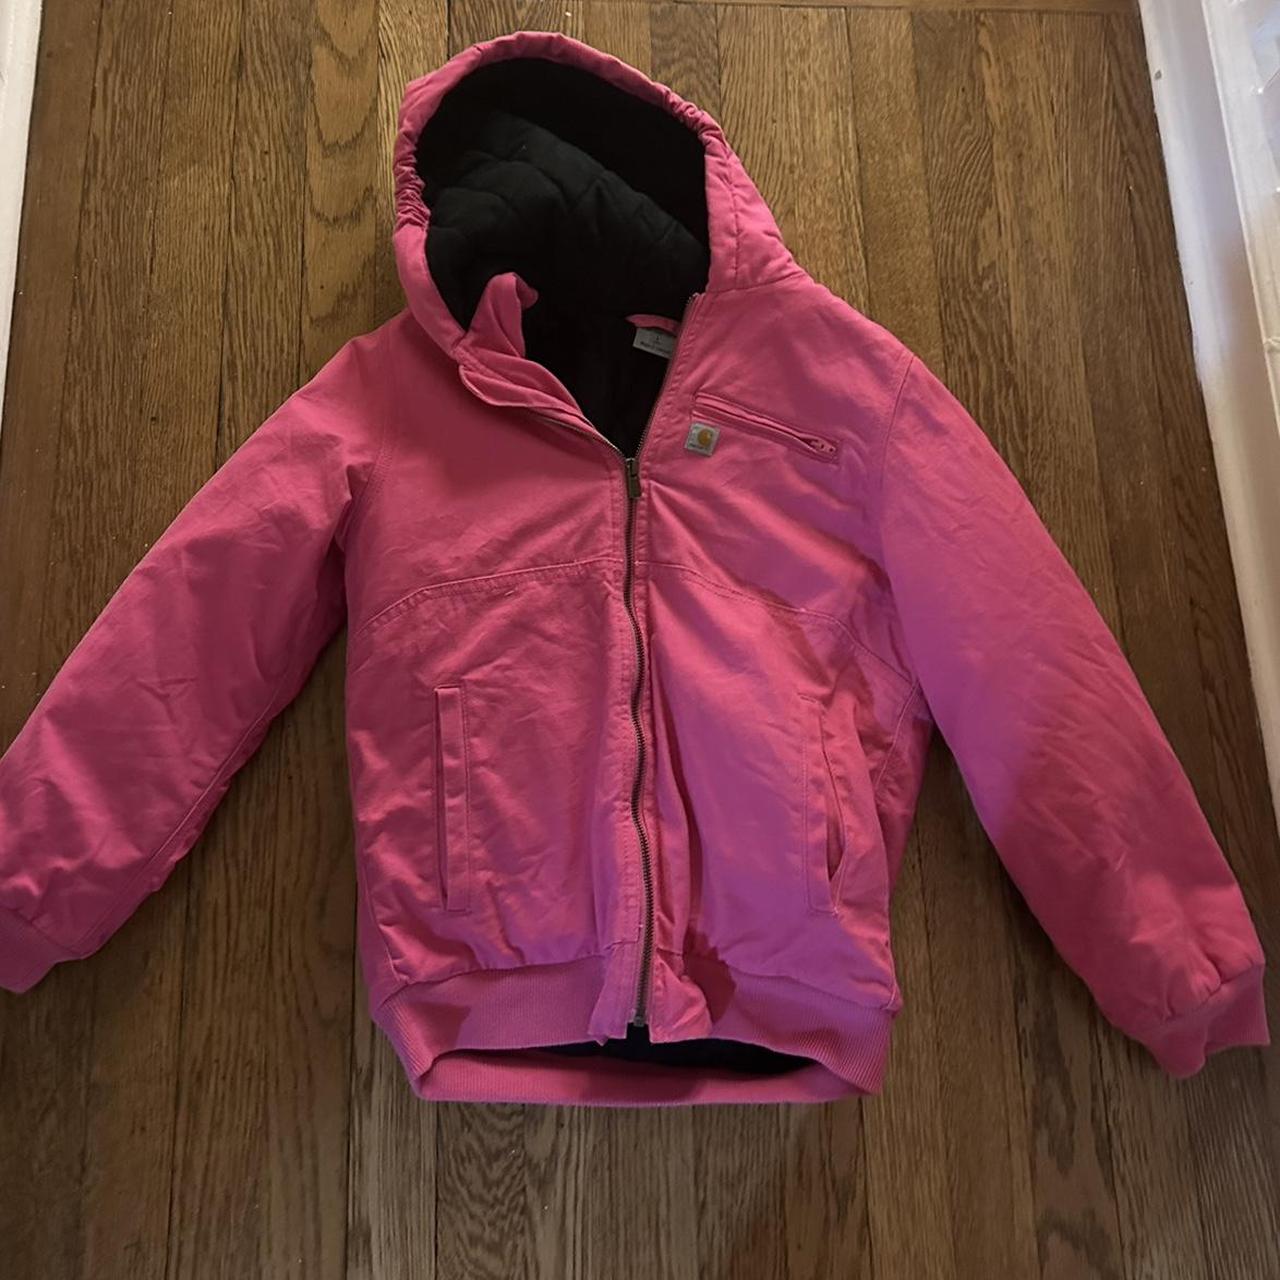 Pink carhartt jacket Size youth large but would... - Depop